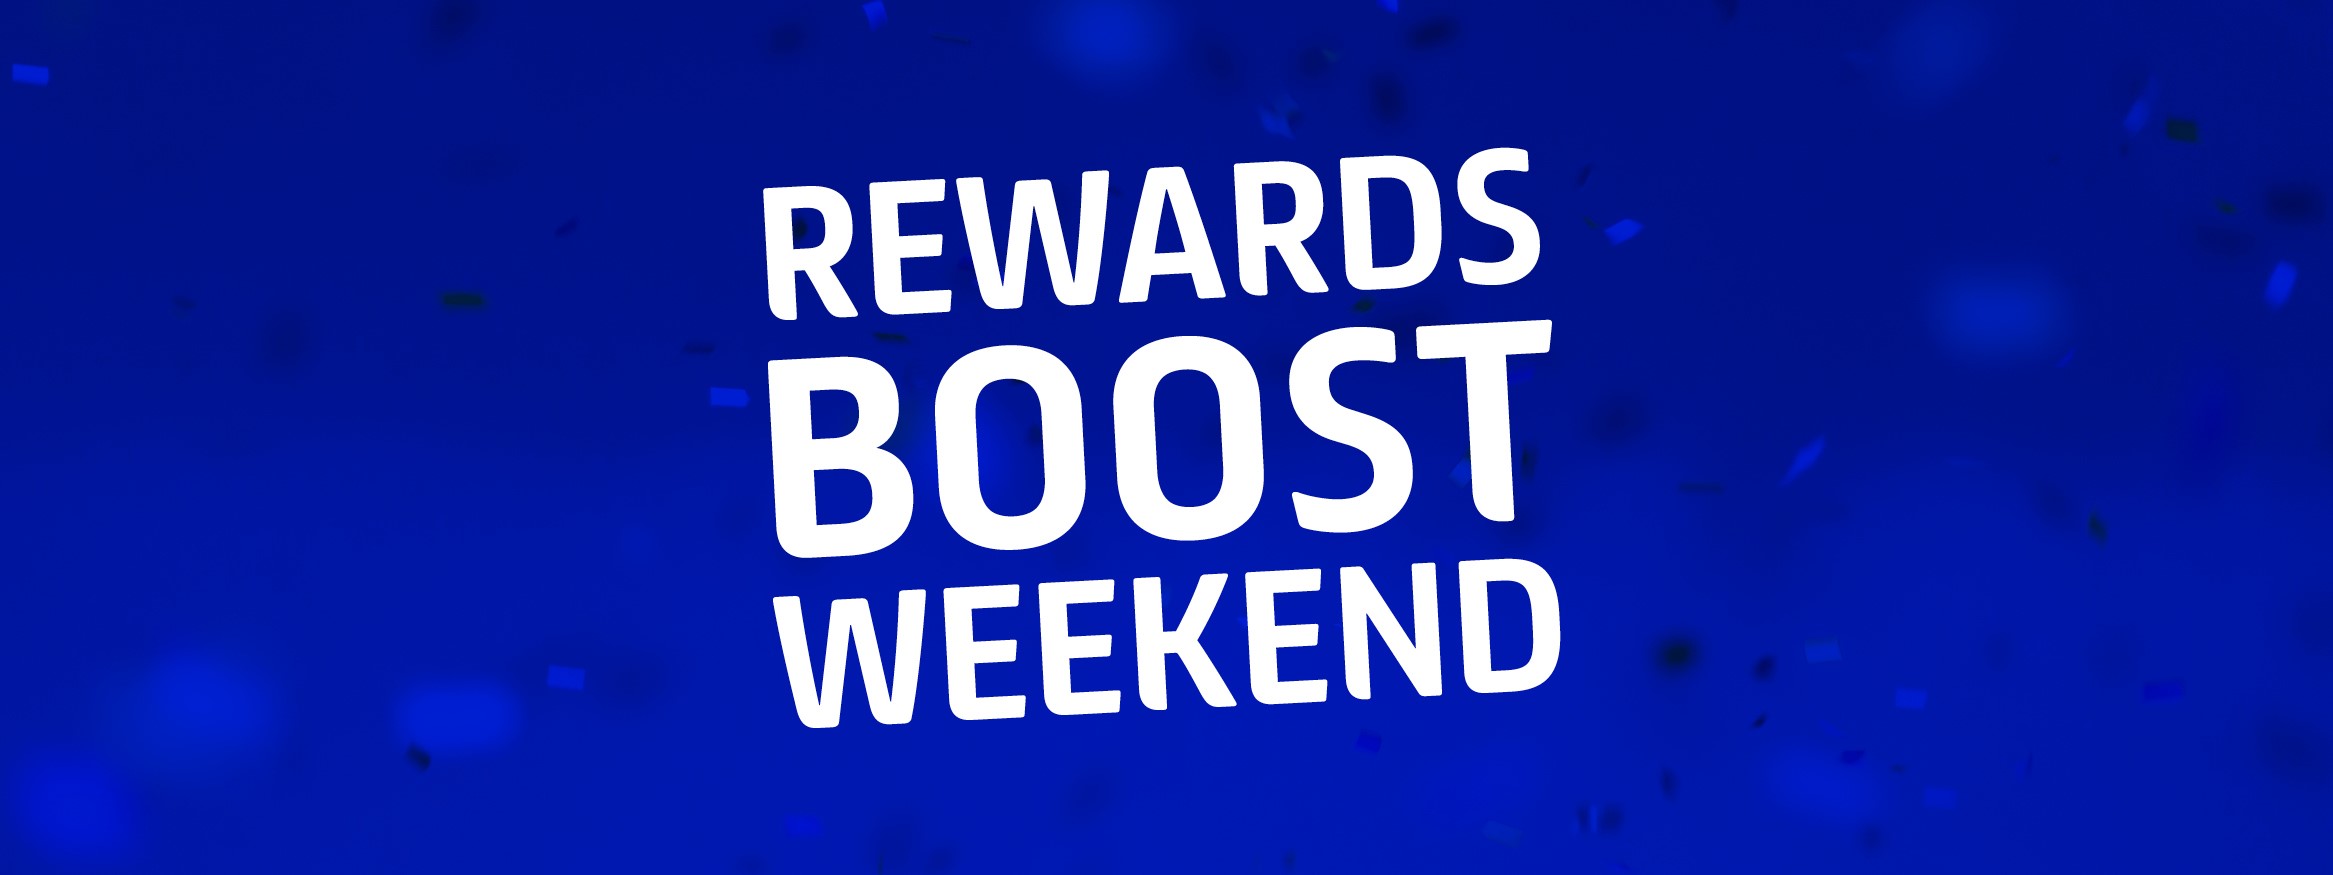 1,000 TO BE WON THIS WEEKEND WITH SKY BET EFL REWARDS - News